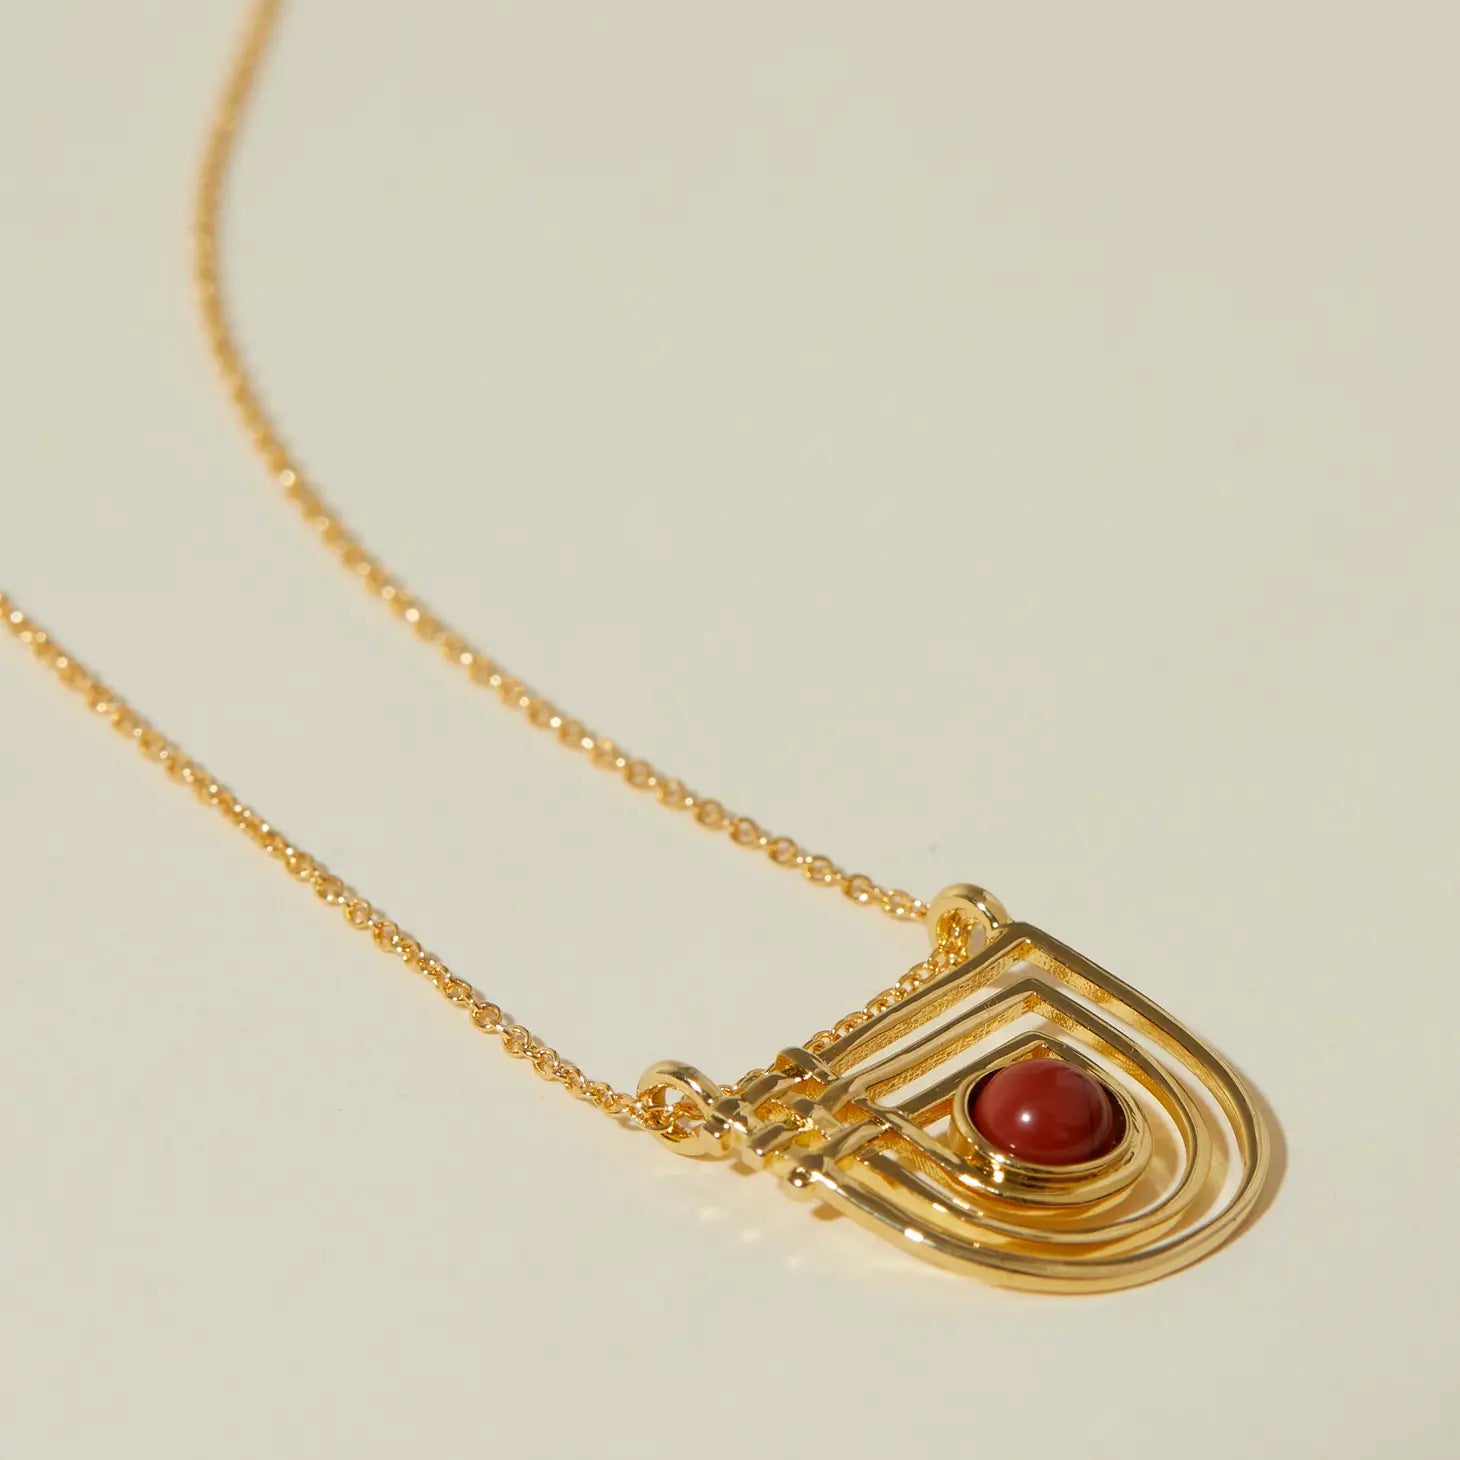 Lindsay Lewis Jewelry Golden Era Necklace - Red Jasper | Prelude & Dawn | Los Angeles